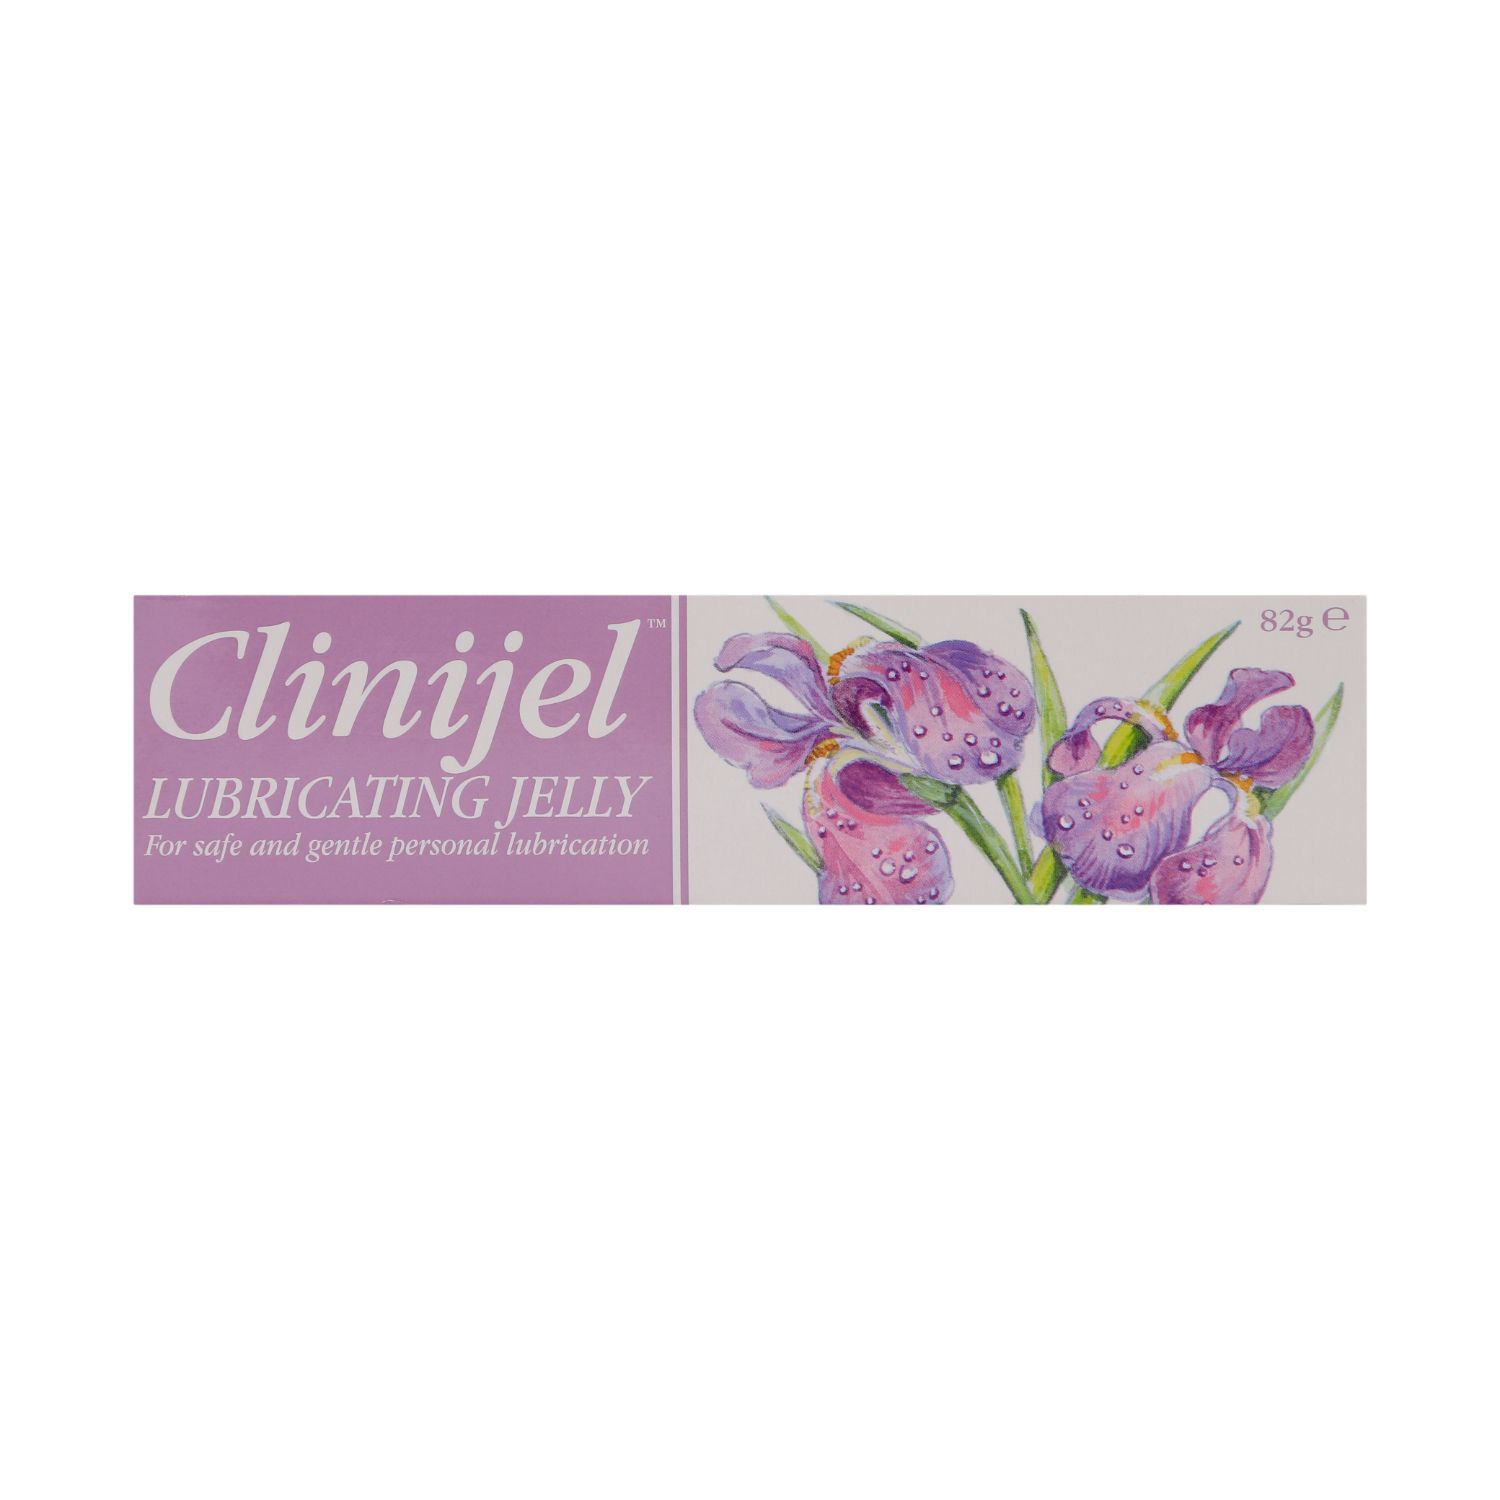 Product Image for Clinijel Lubricating Jelly 82g